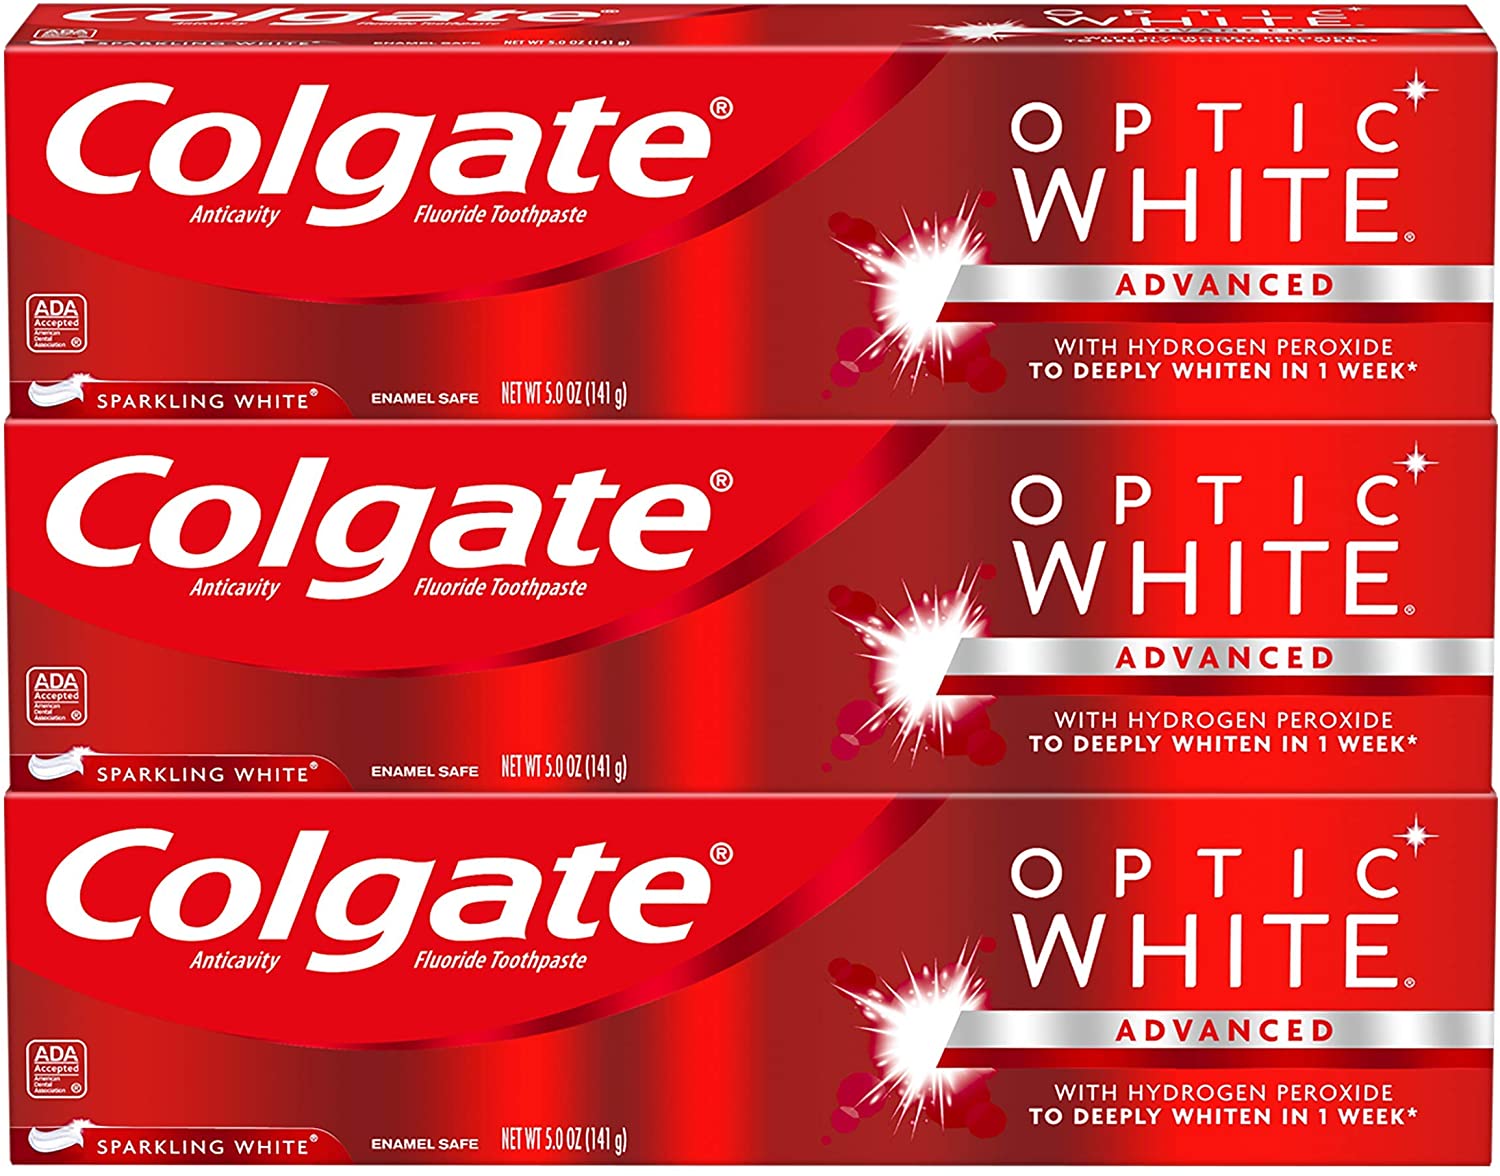 ''Colgate Optic White Whitening TOOTHPASTE, Sparkling White - 5 ounce (3 Pack)''